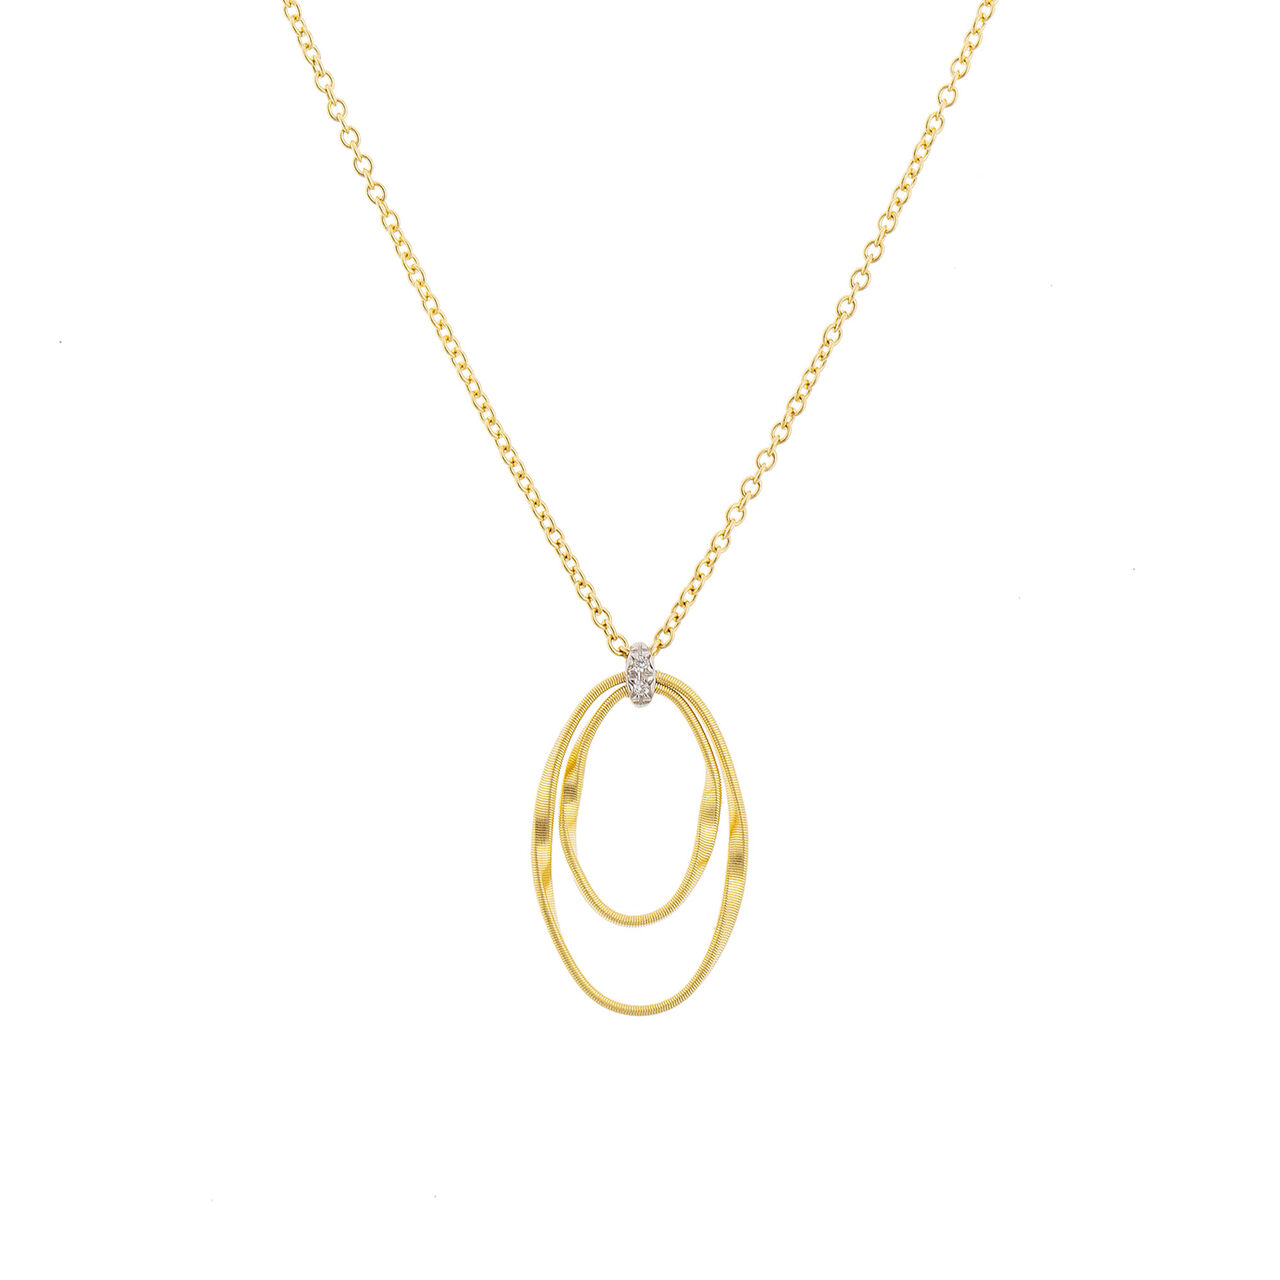 maison birks marco bicego marrakech onde yellow gold and diamond coil pendant necklace cg784 b yw m5 image number 0